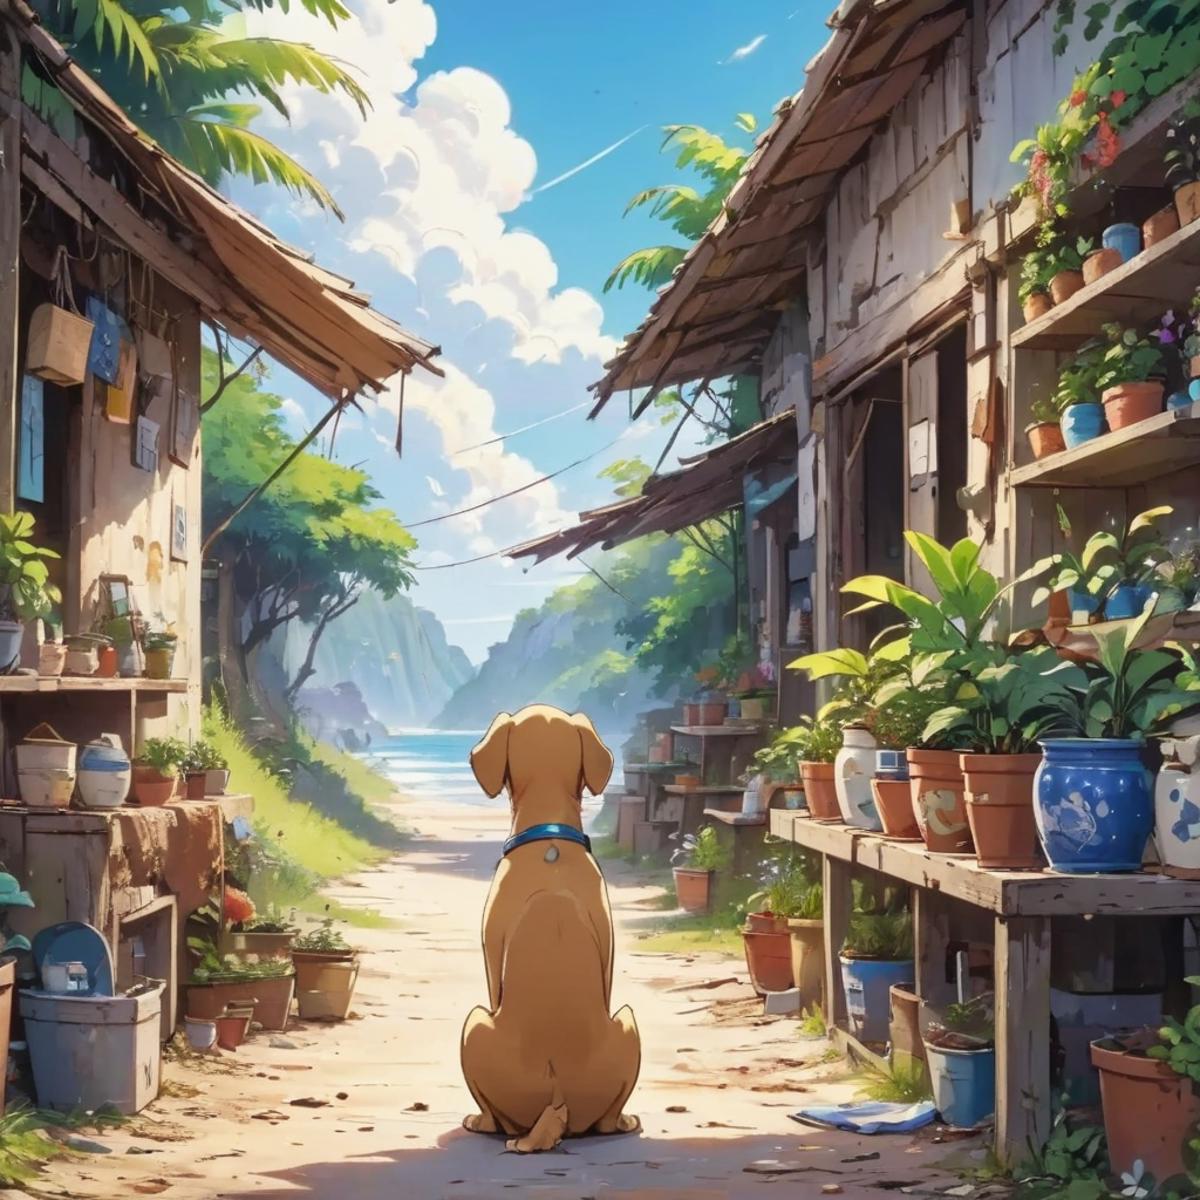 Brown dog sitting on a dirt road in front of a shack with potted plants.